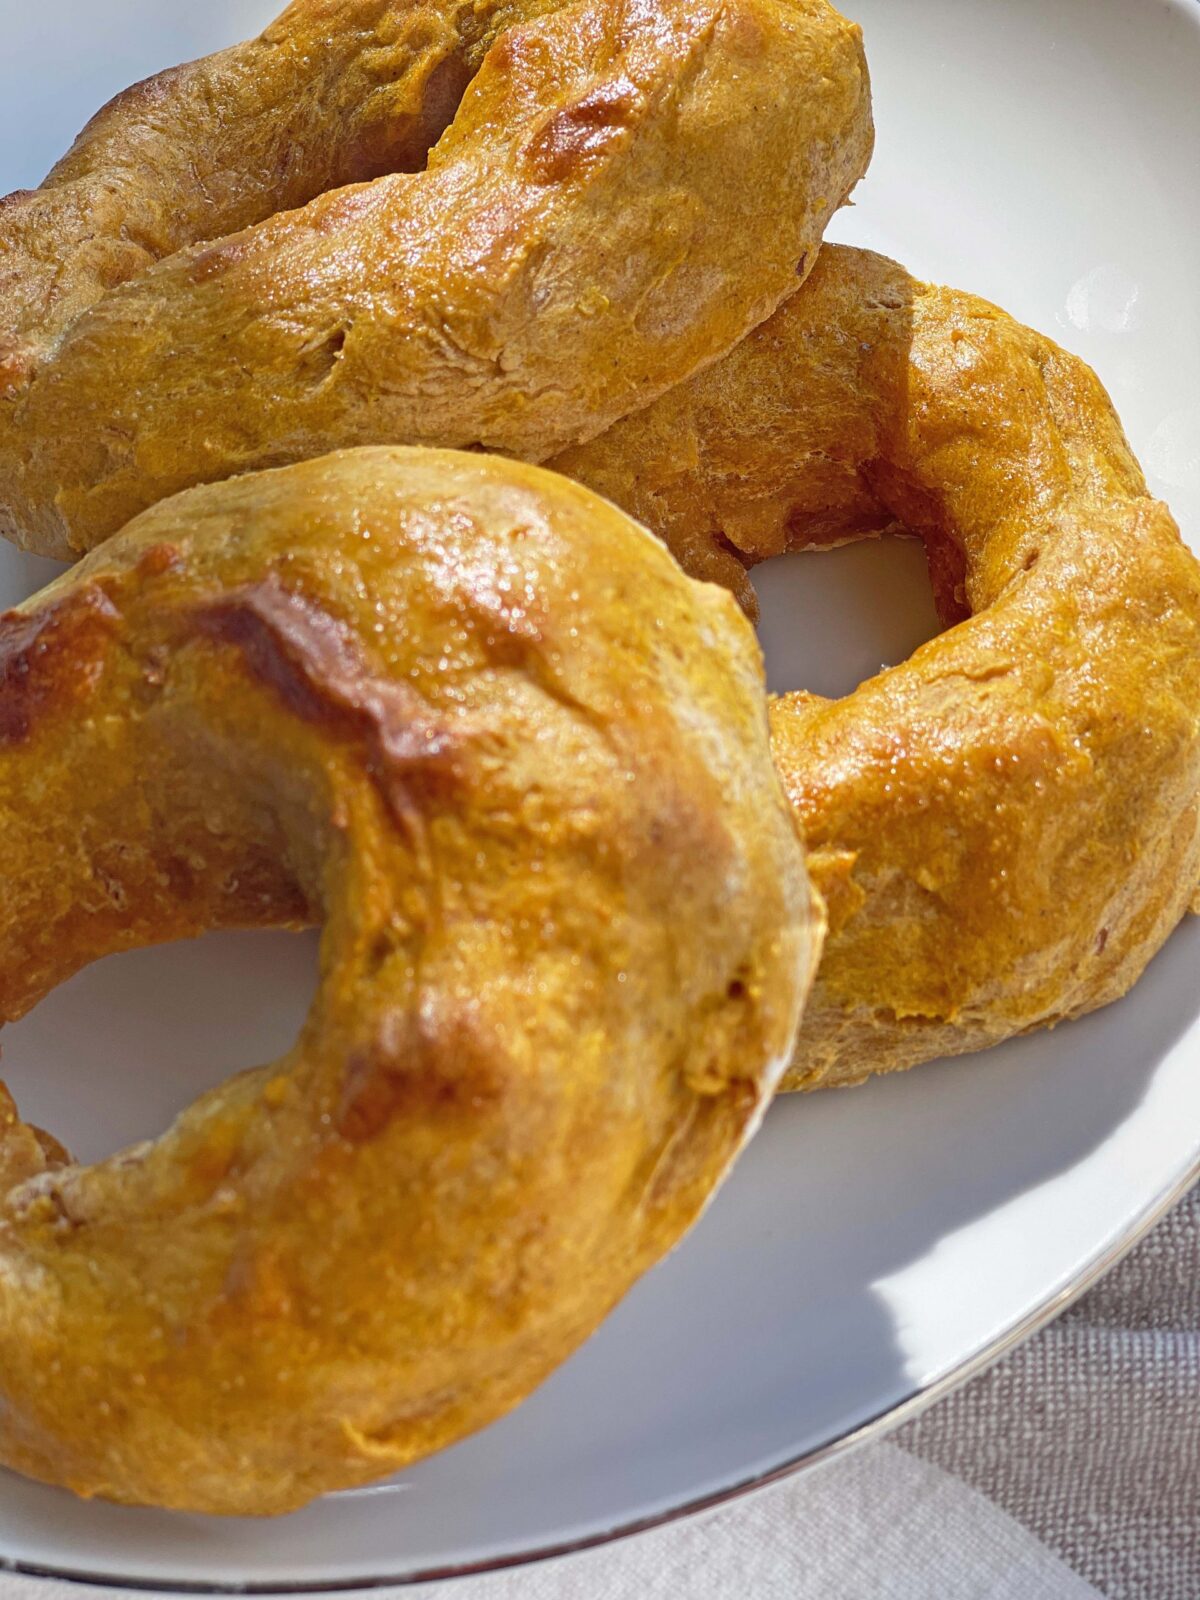 3 Ingredient Pumpkin Bagel Recipe. This I s an easy Fall recipe that uses pumpkin spice in your pantry. This is also a non-baker easy baking recipe. Happy Baking! www.ChopHappy.com #PumpkinBagels #Pumpkinrecipes